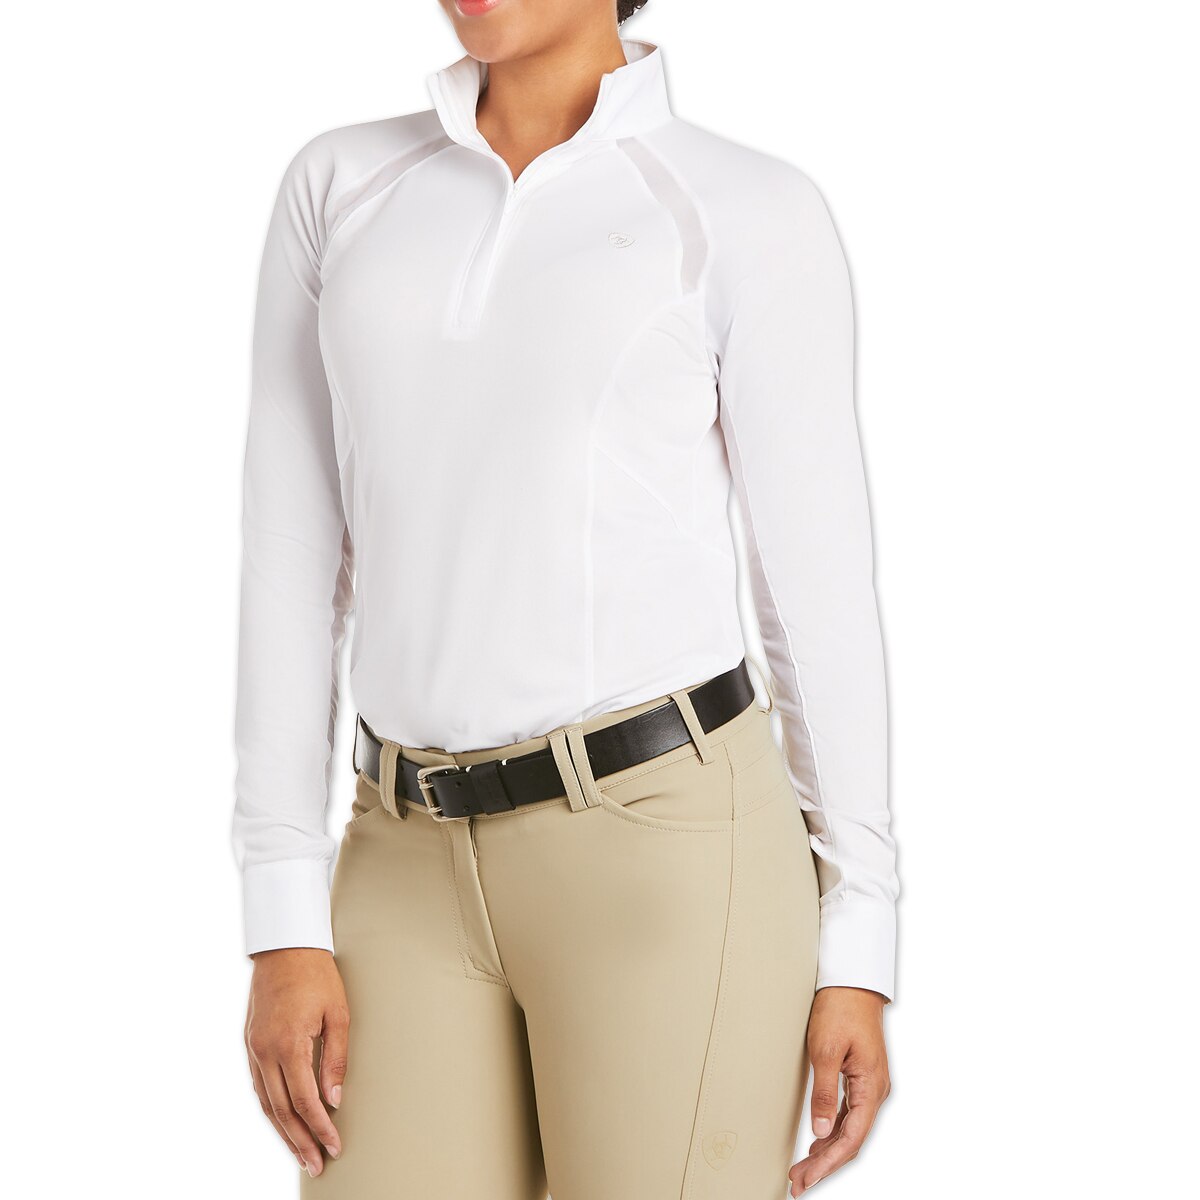 Different Colors and Sizes Ariat Women's Sunstopper Pro Show Shirt 